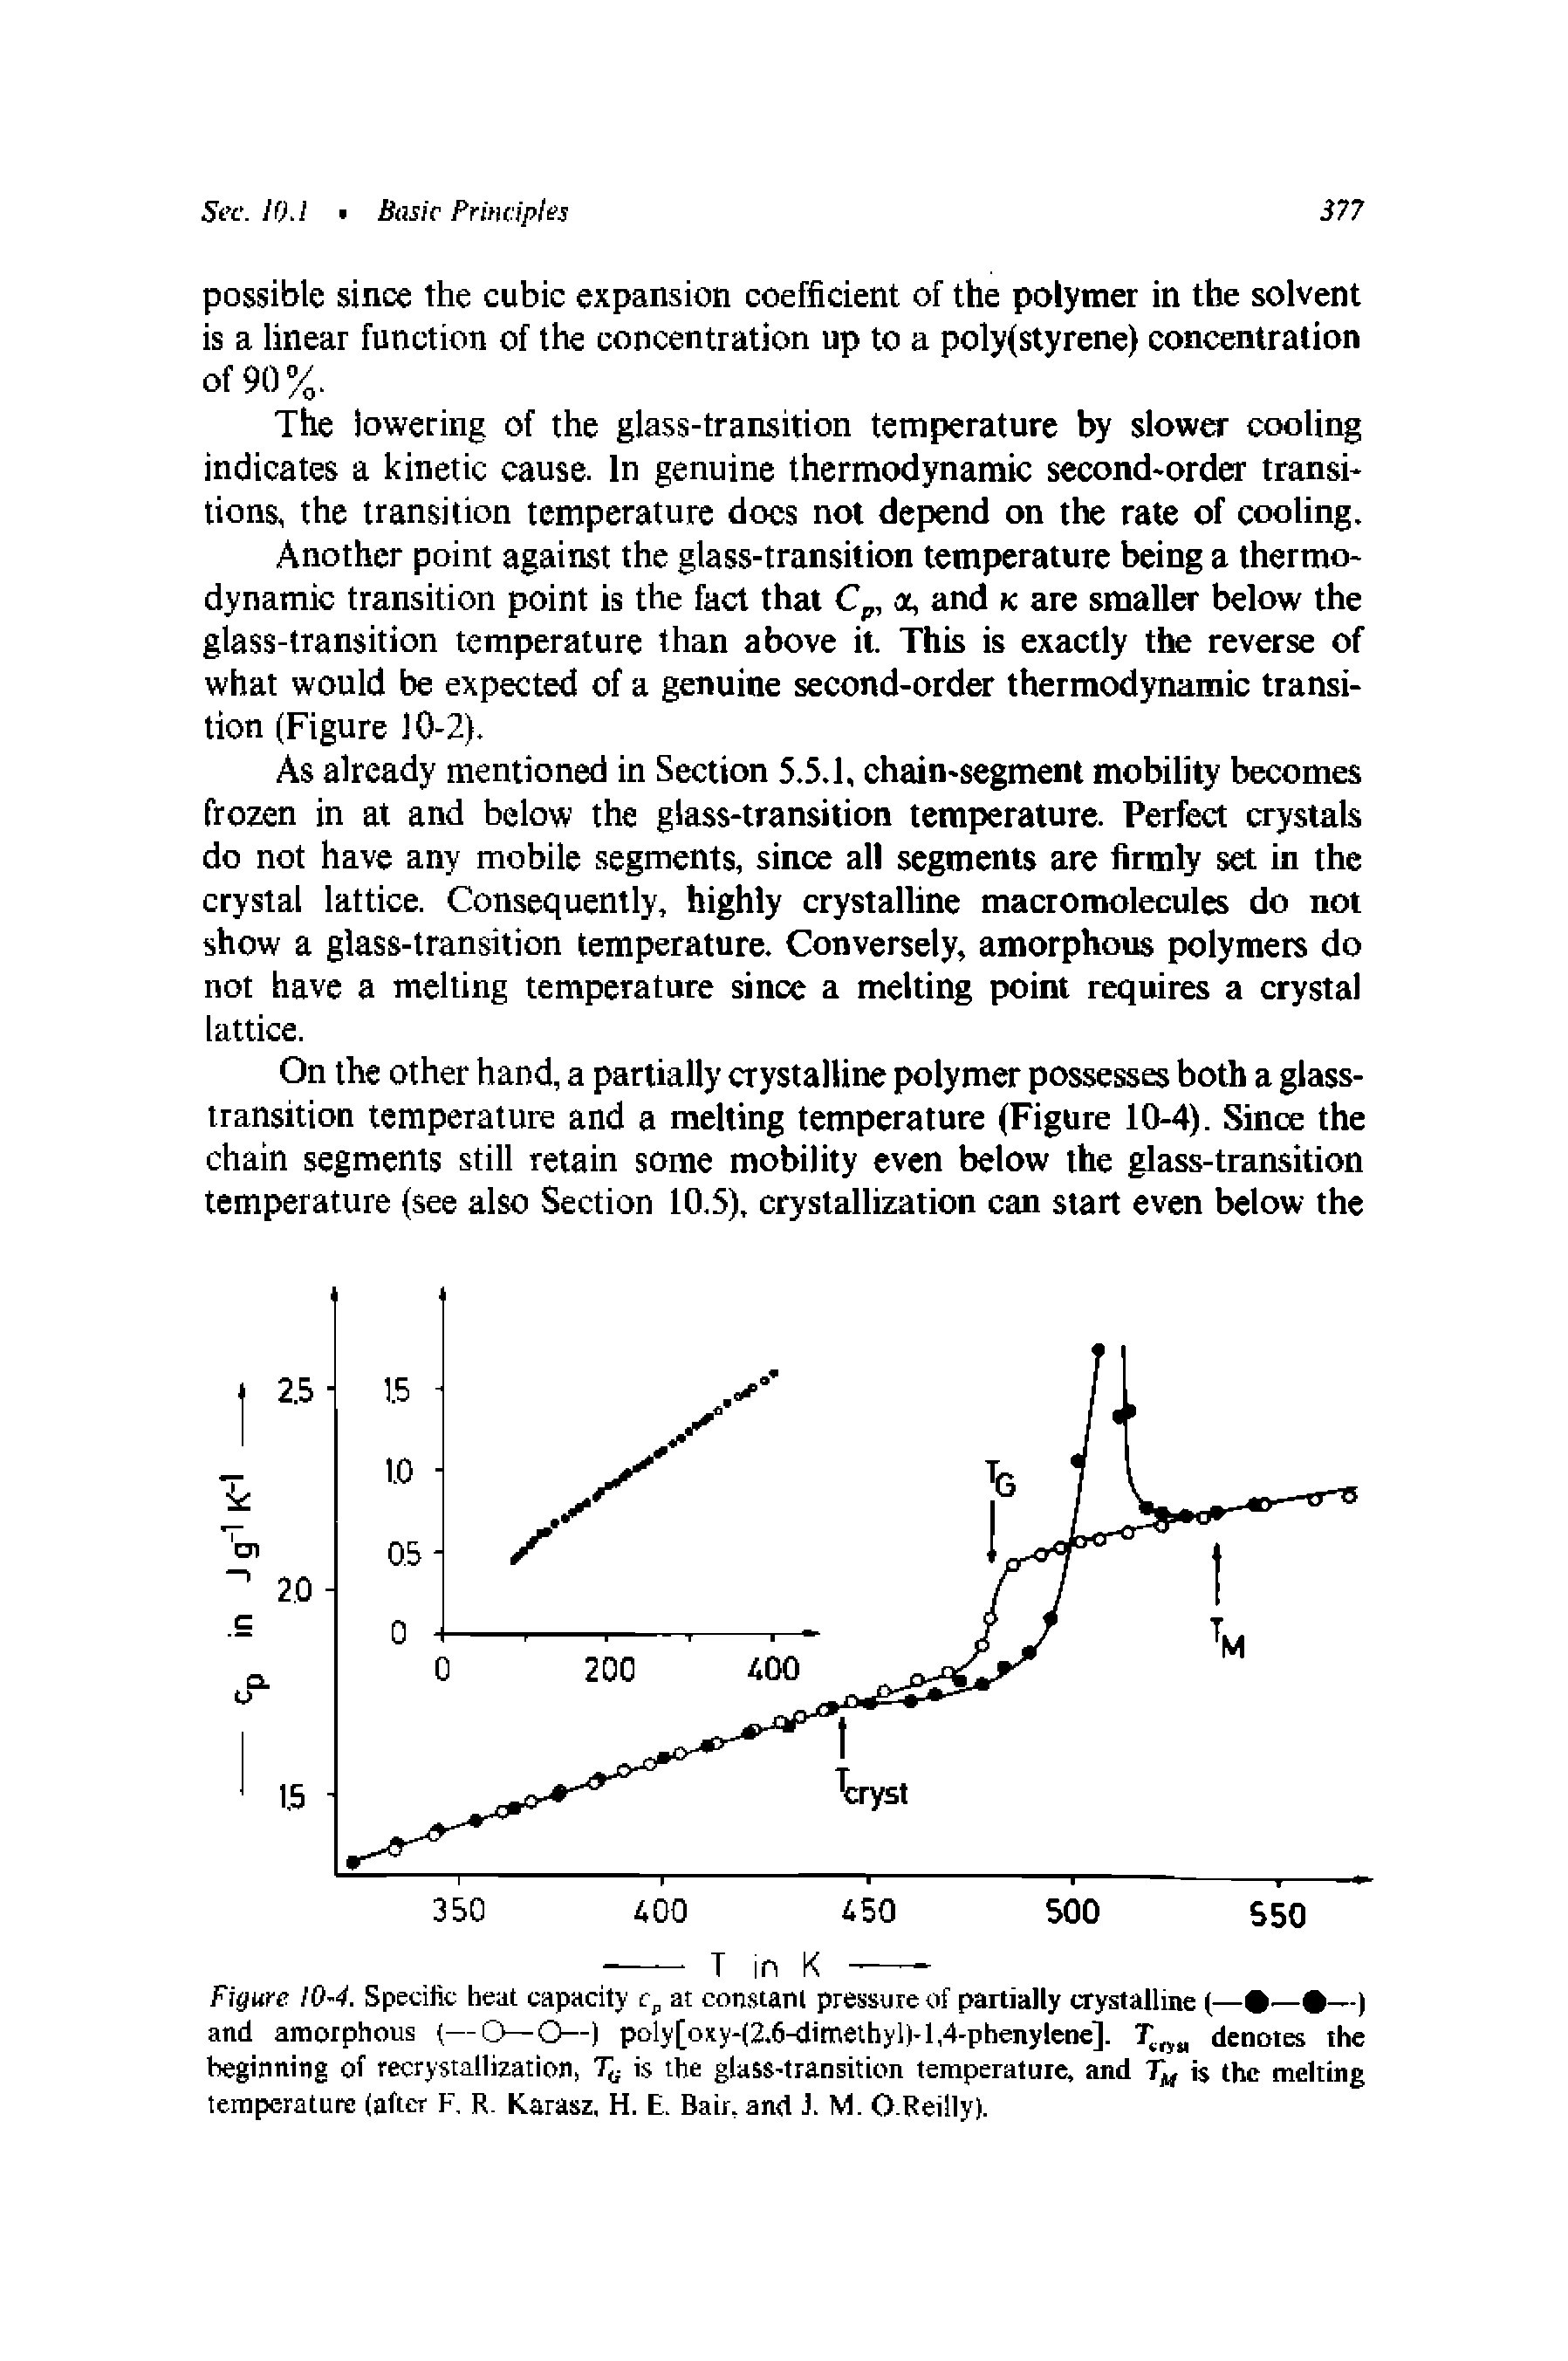 Figure 10-4. Specific heat capacity r, at constant pressure of partially crystalline (— — —) and amorphous (—O—O—) poly[oxy-(2.6-dimethyl)-l,4-phenylene]. denotes the...